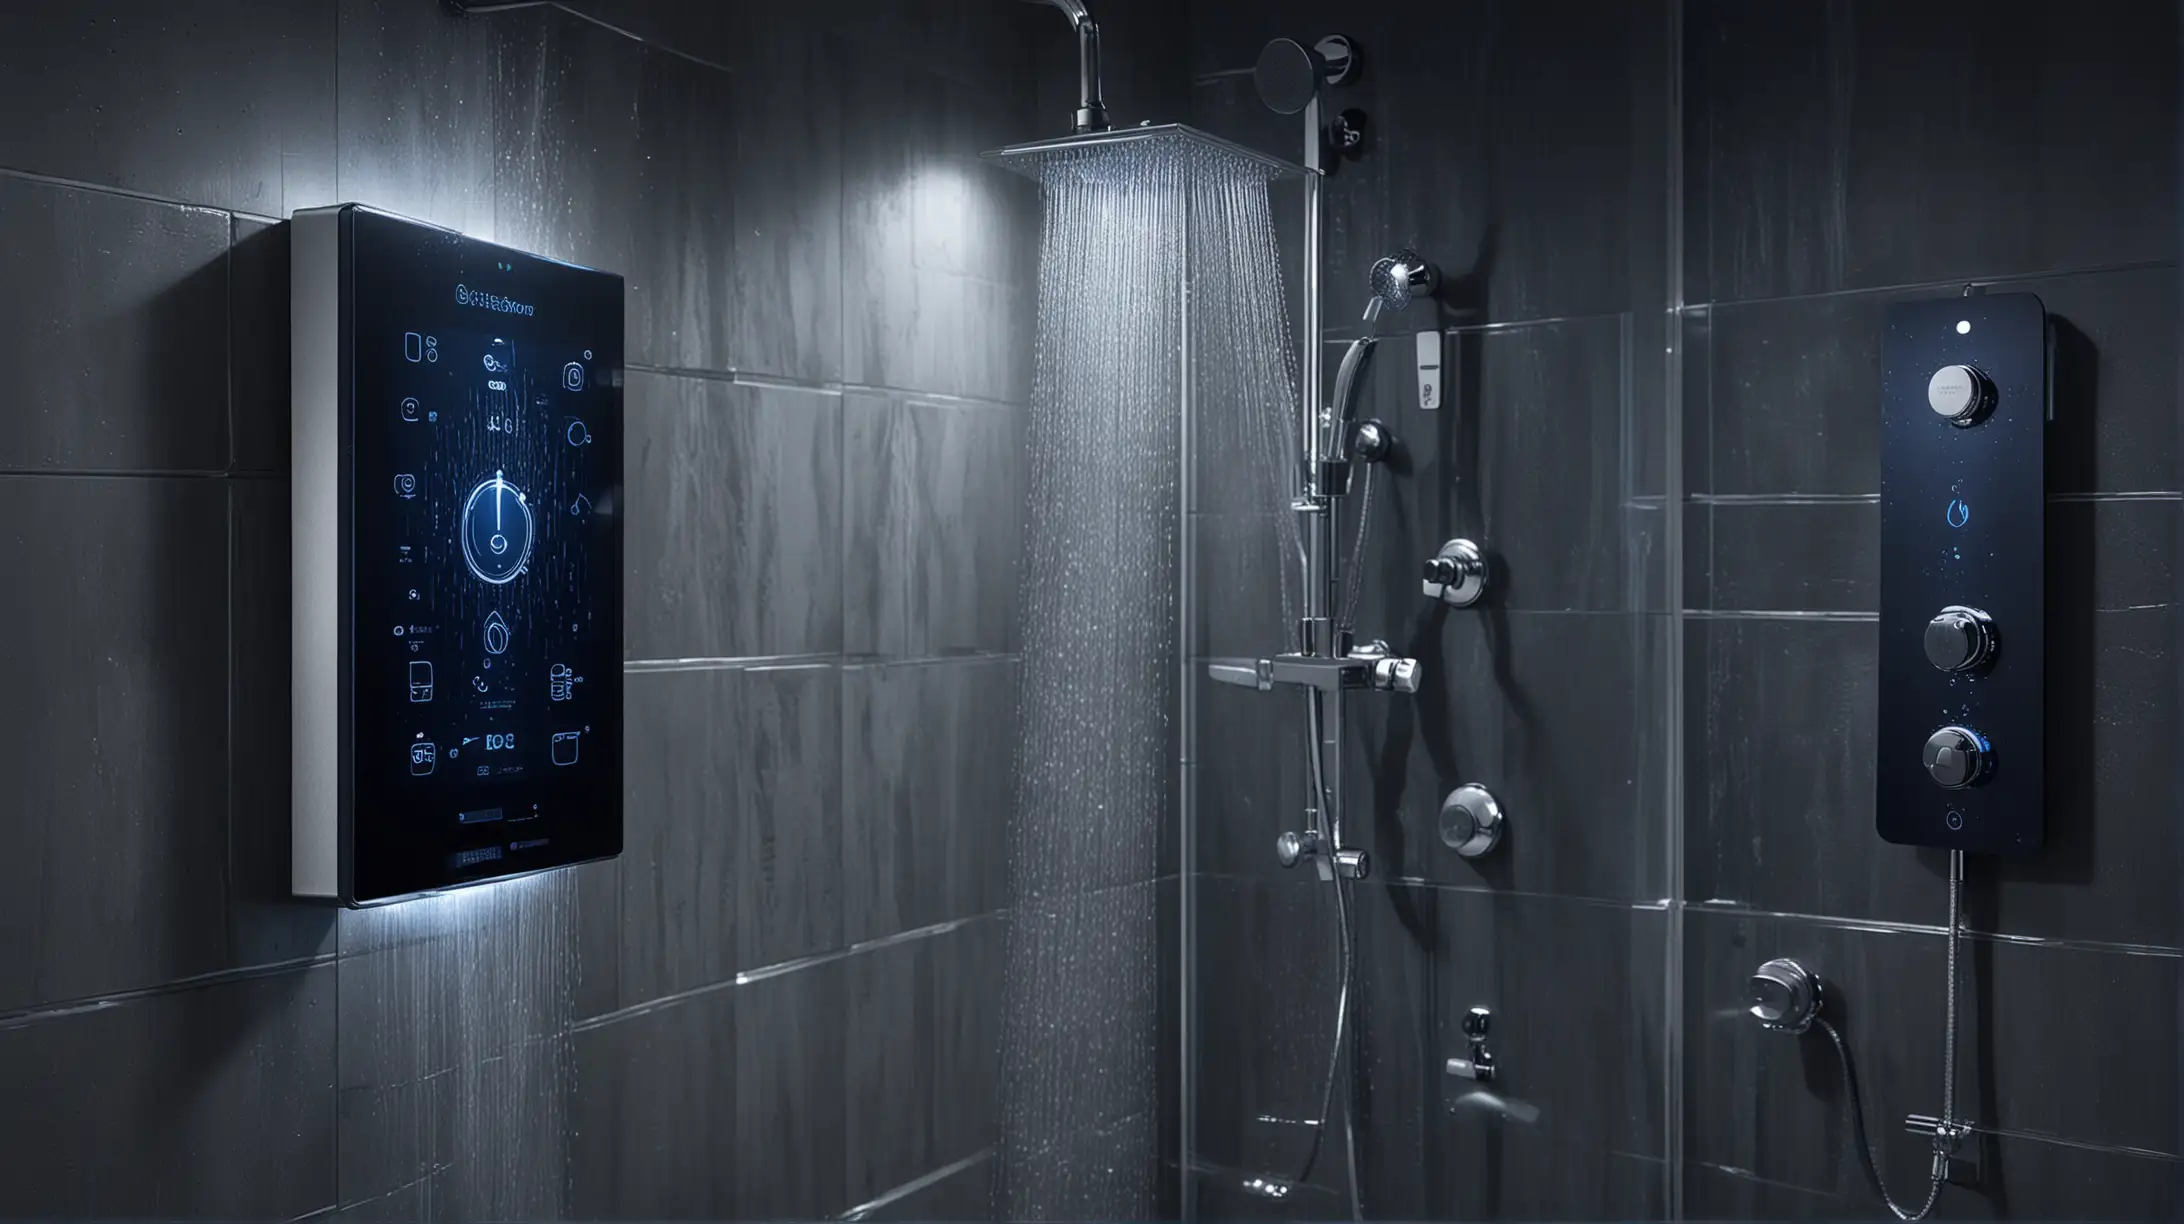 professional photo in dark blue theme. a private house showing sensors on two different showers. house owner has an app where he can control water sensors